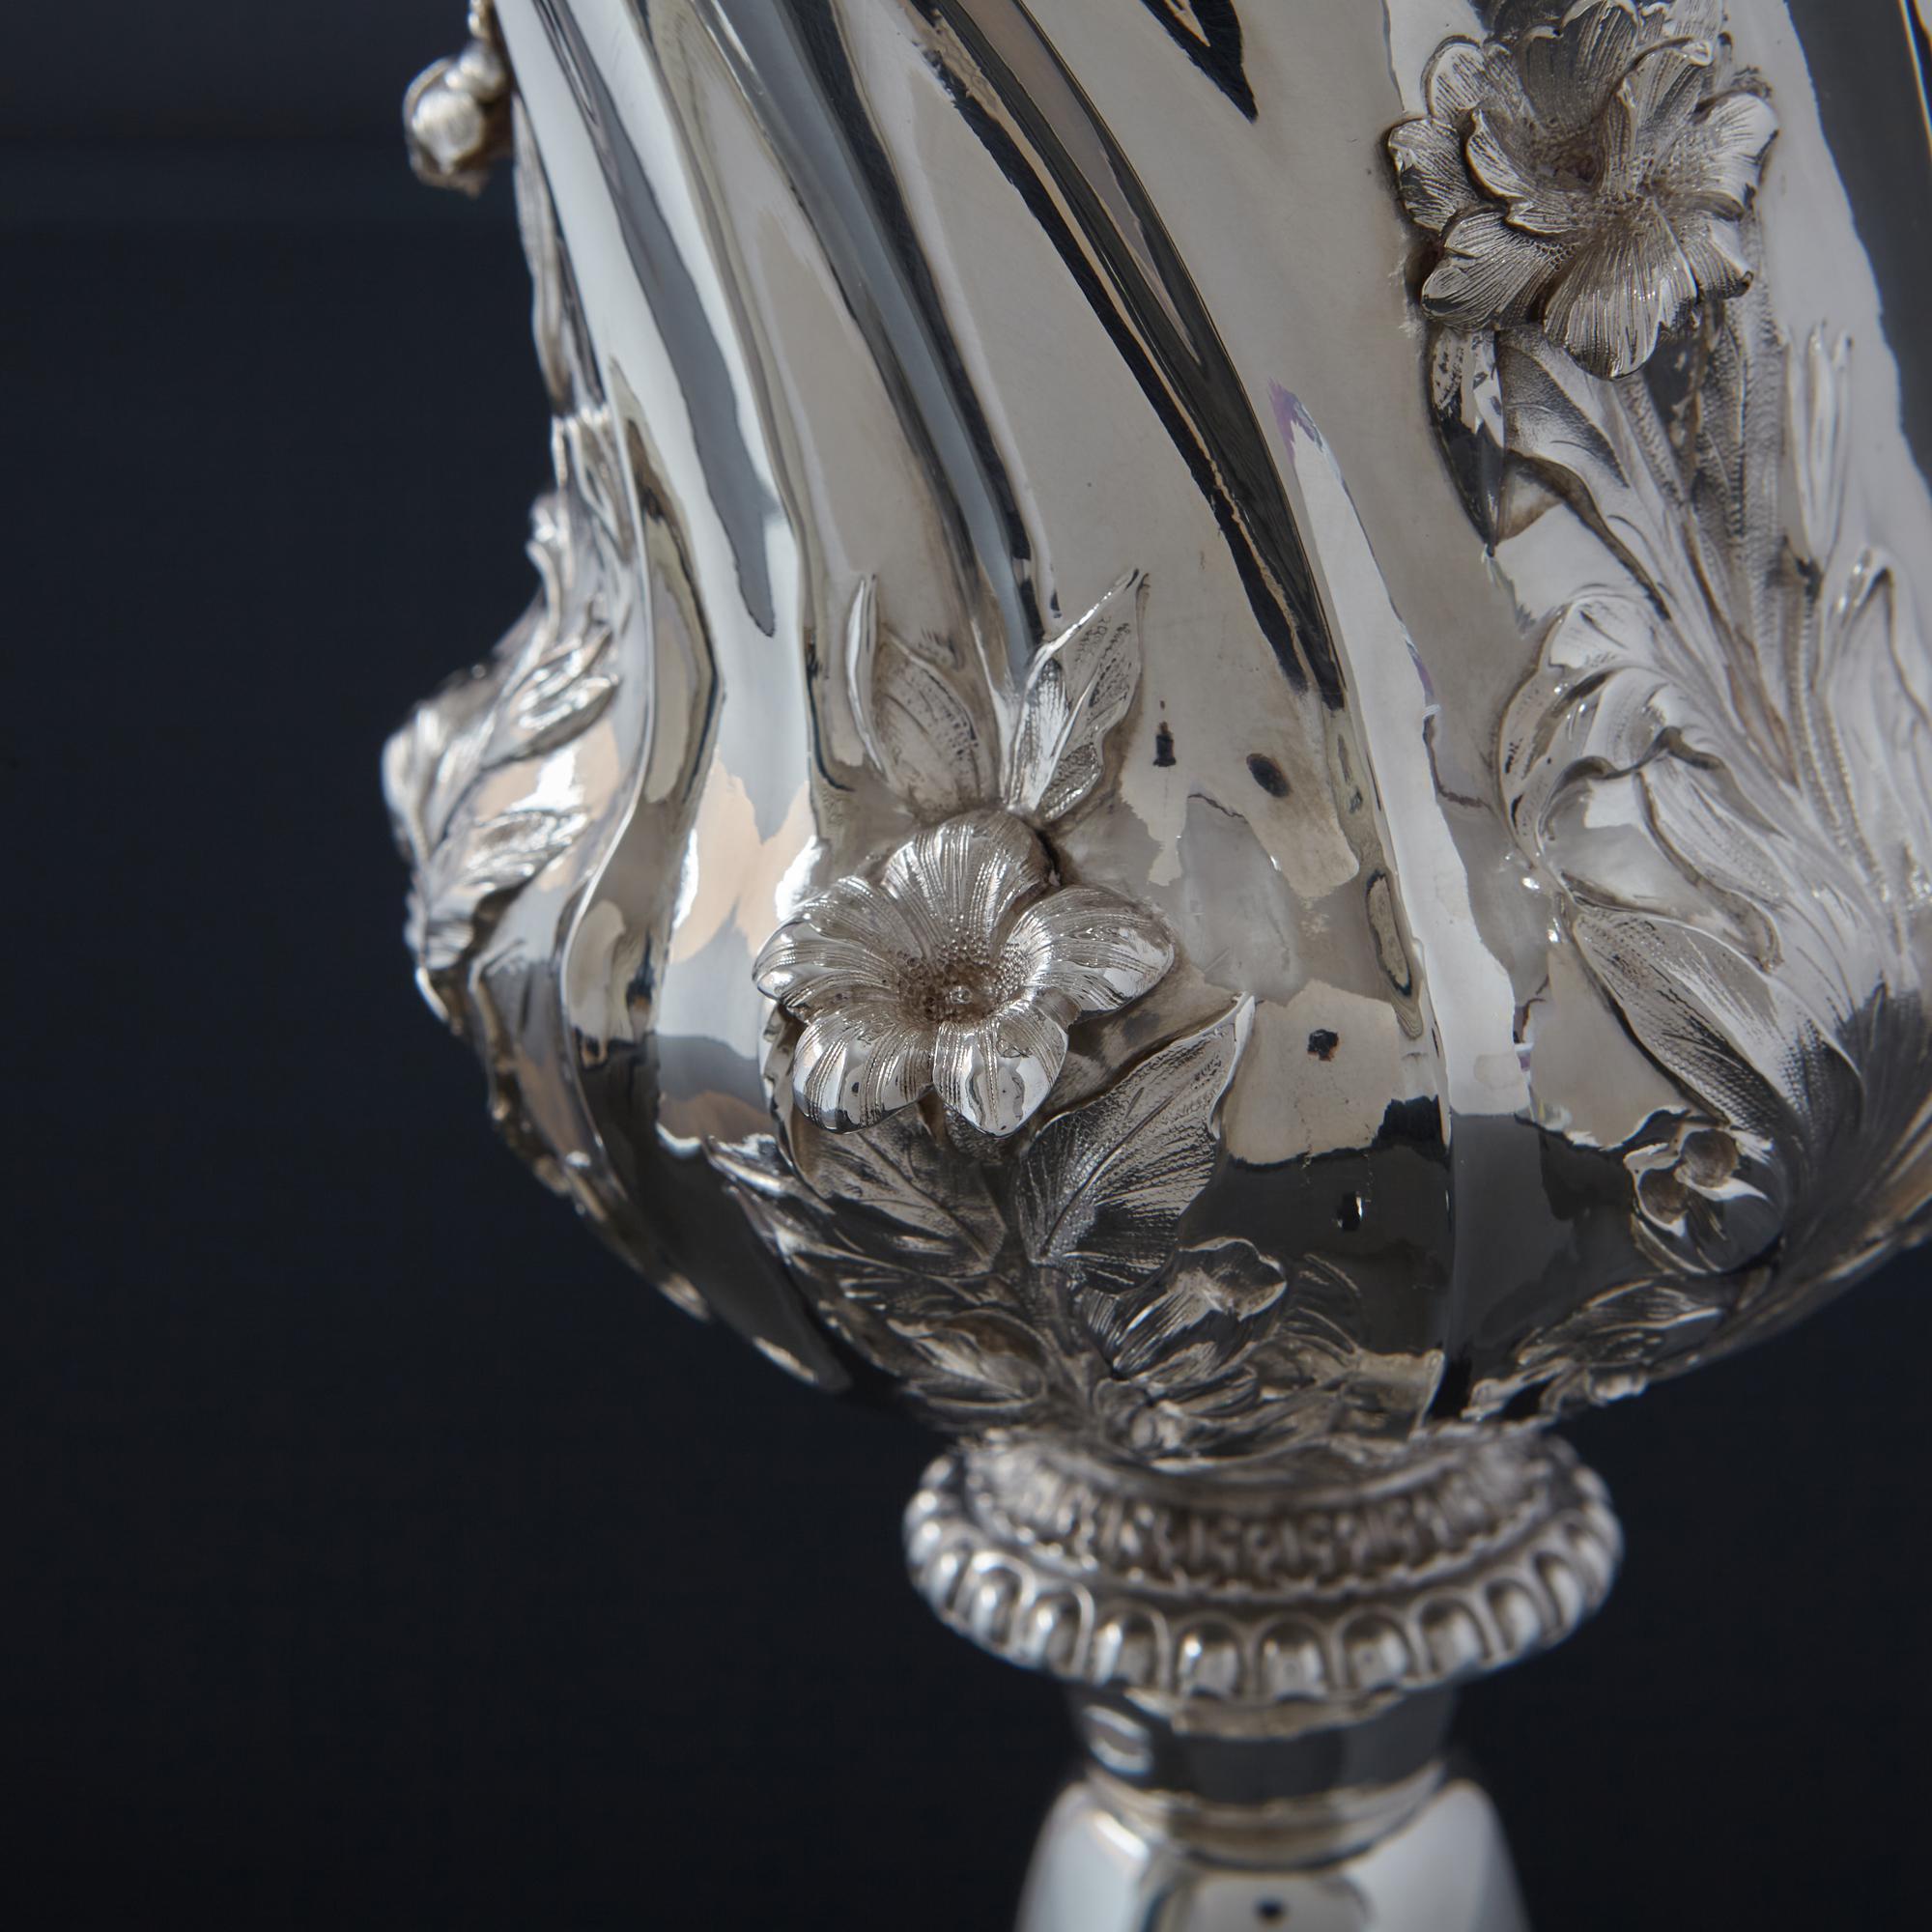 A large and beautifully made antique silver goblet with highly defined hand-chased floral and foliage decorations around the body and base. With a gilded interior, the goblet bowl also incorporates chased and swirled fluting and applied cast flower